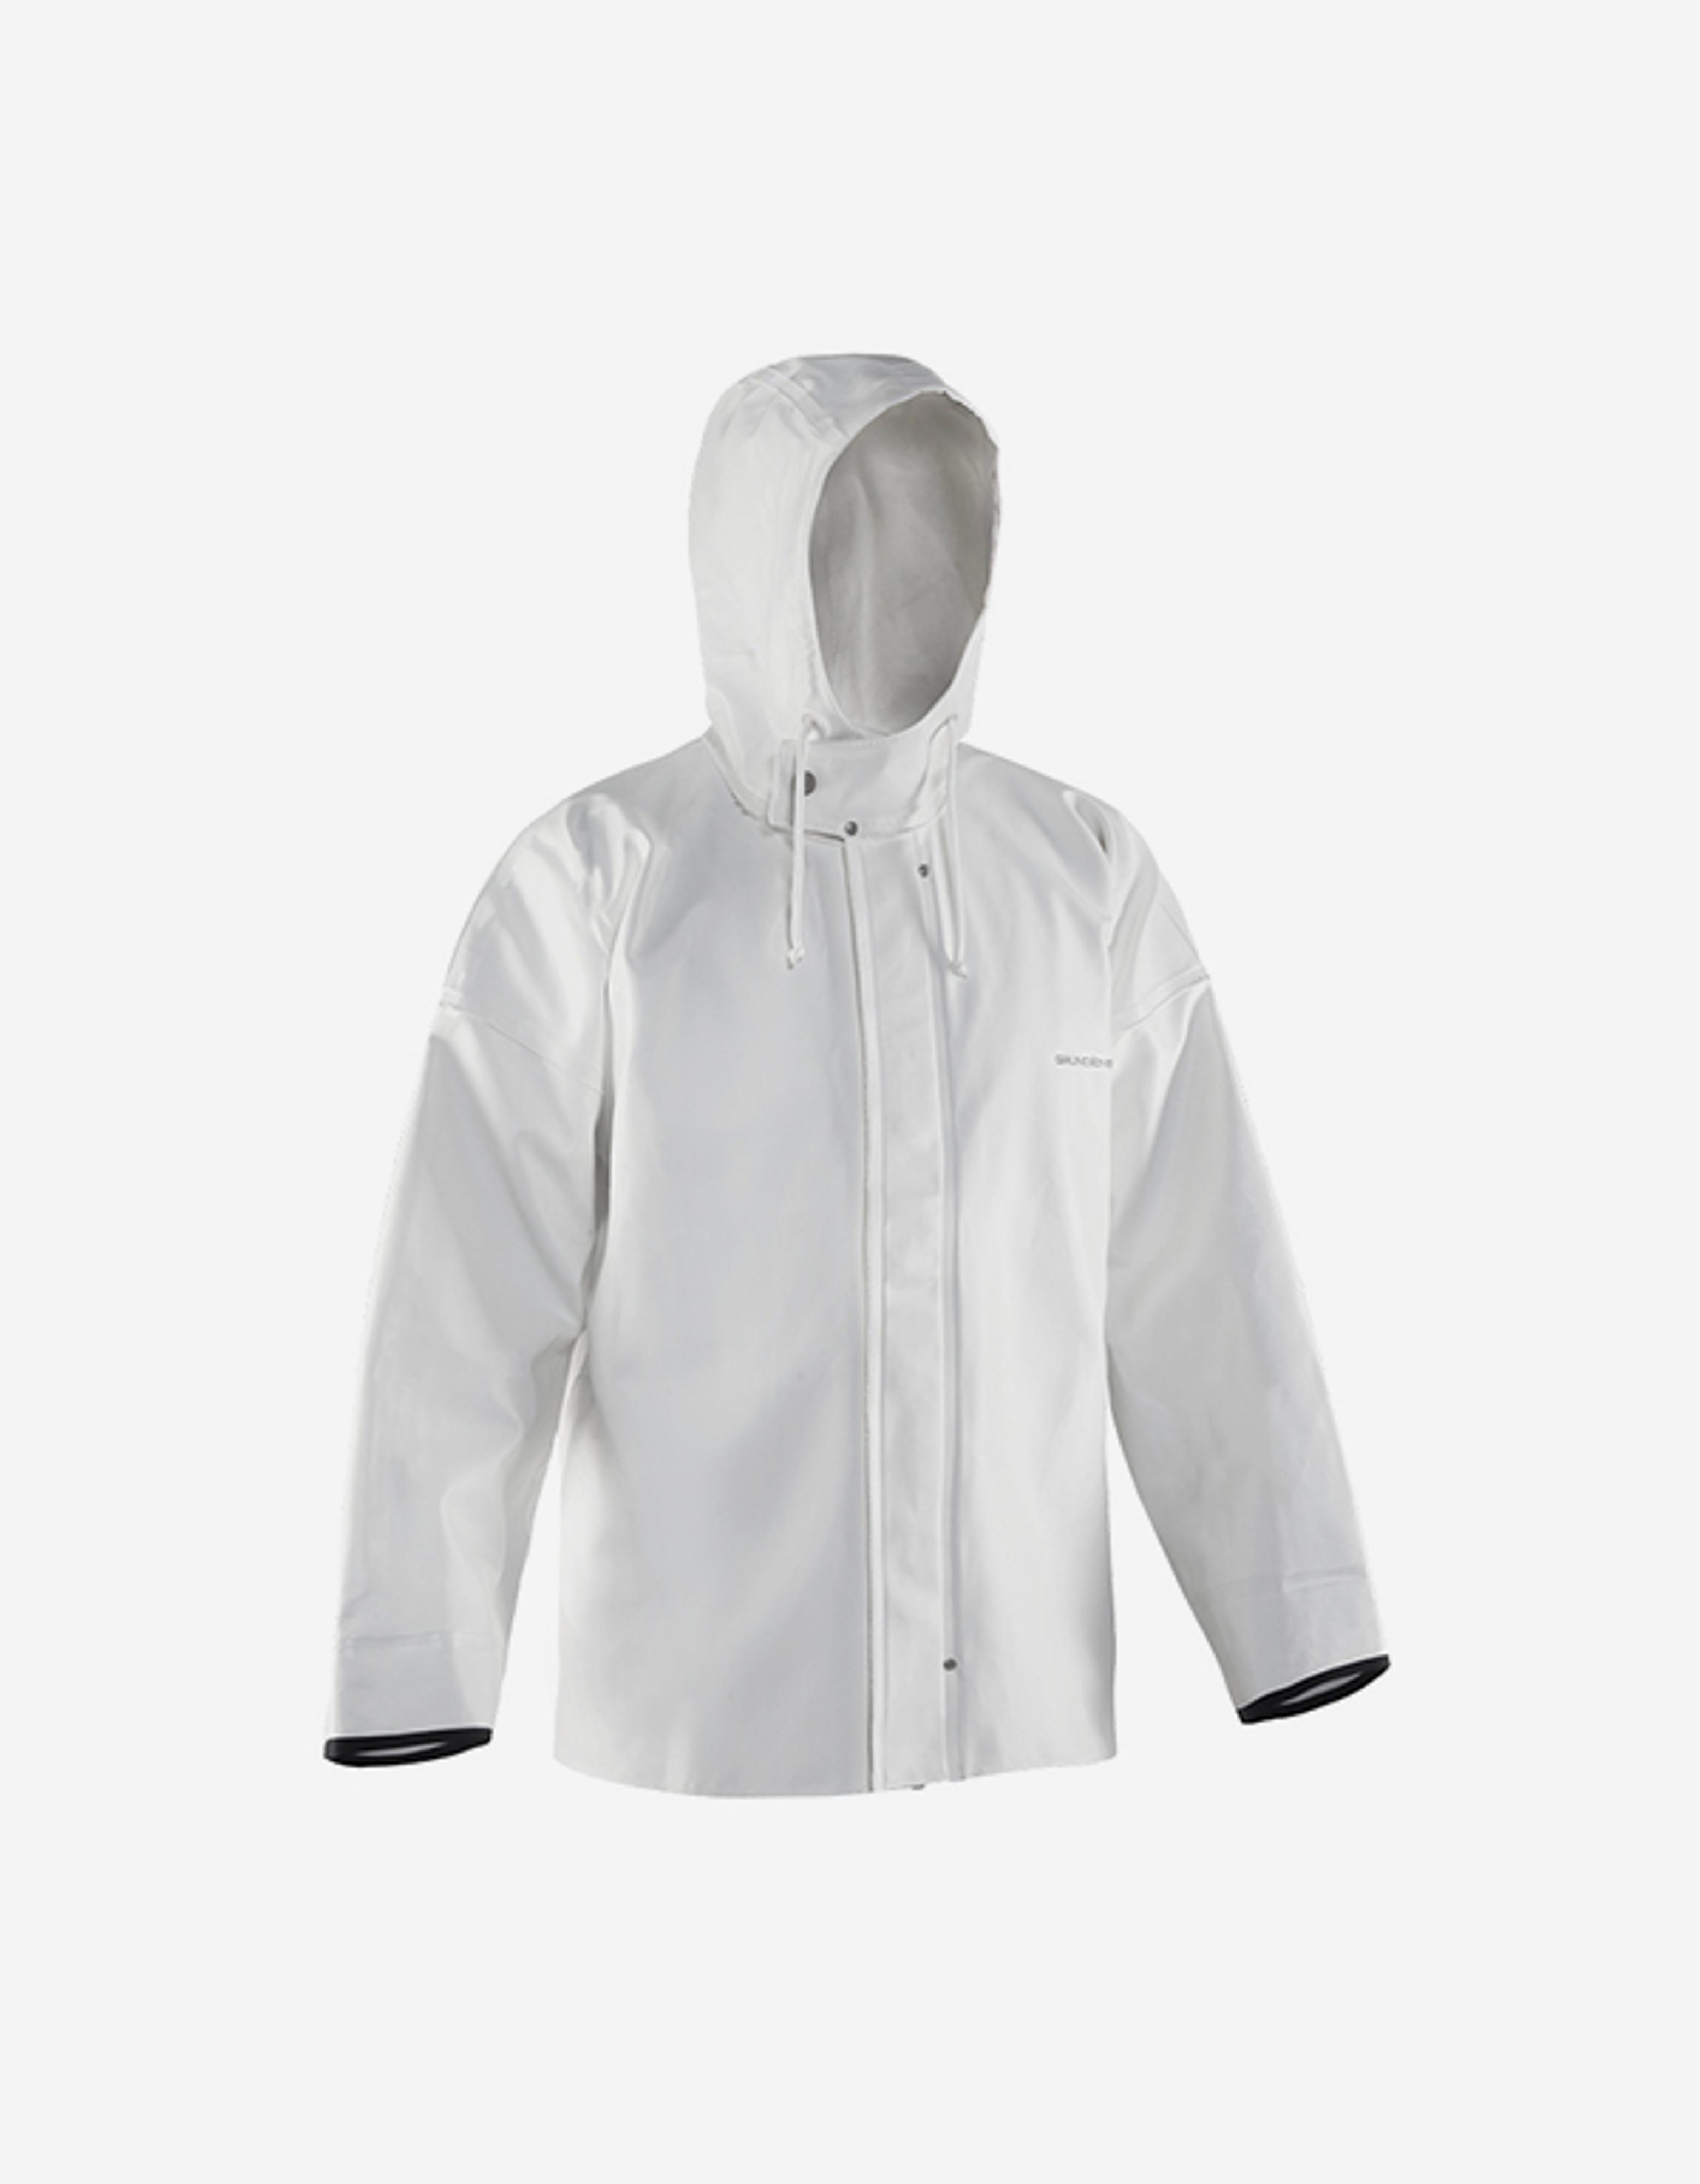 Apparel - Foul Weather Gear: Fishermans Ideal Supply House